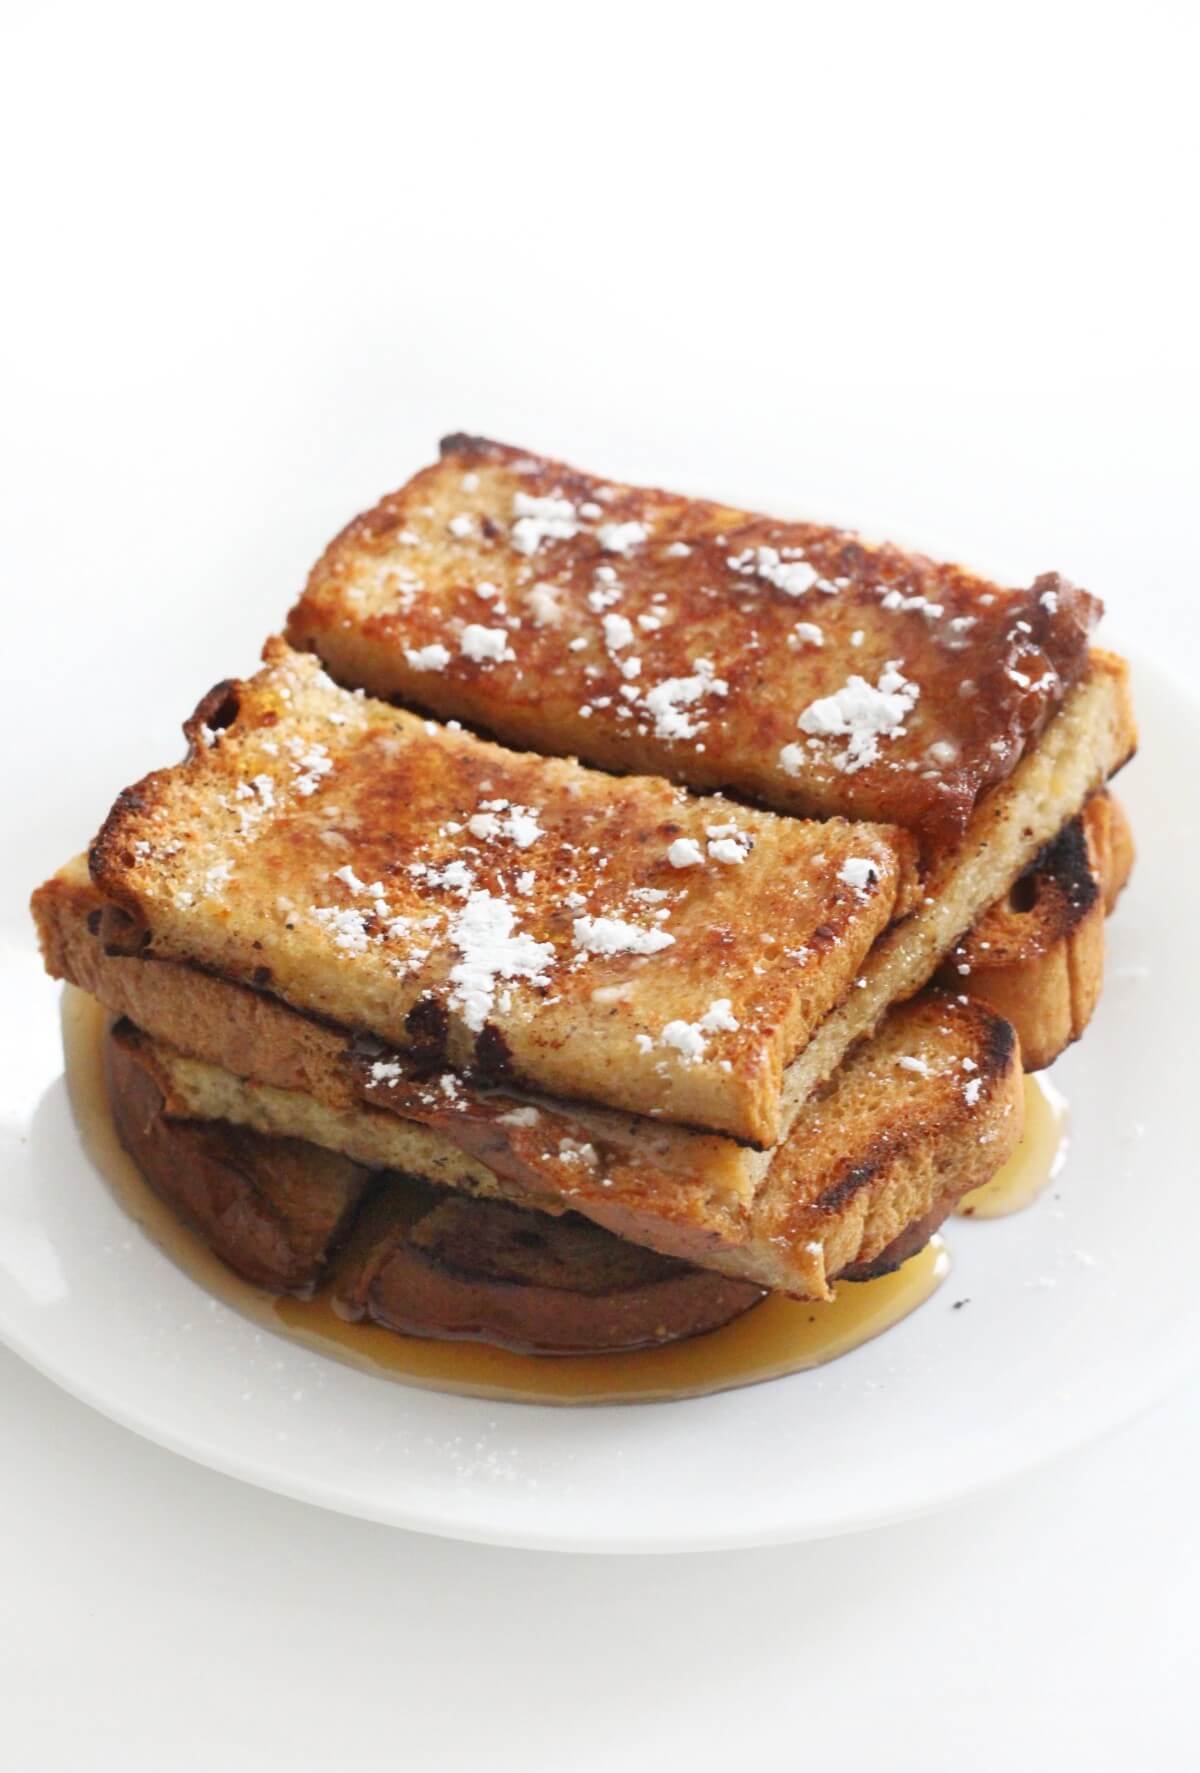 plated tower of gluten-free vegan cinnamon french toast stocks with syrup and powdered sugar